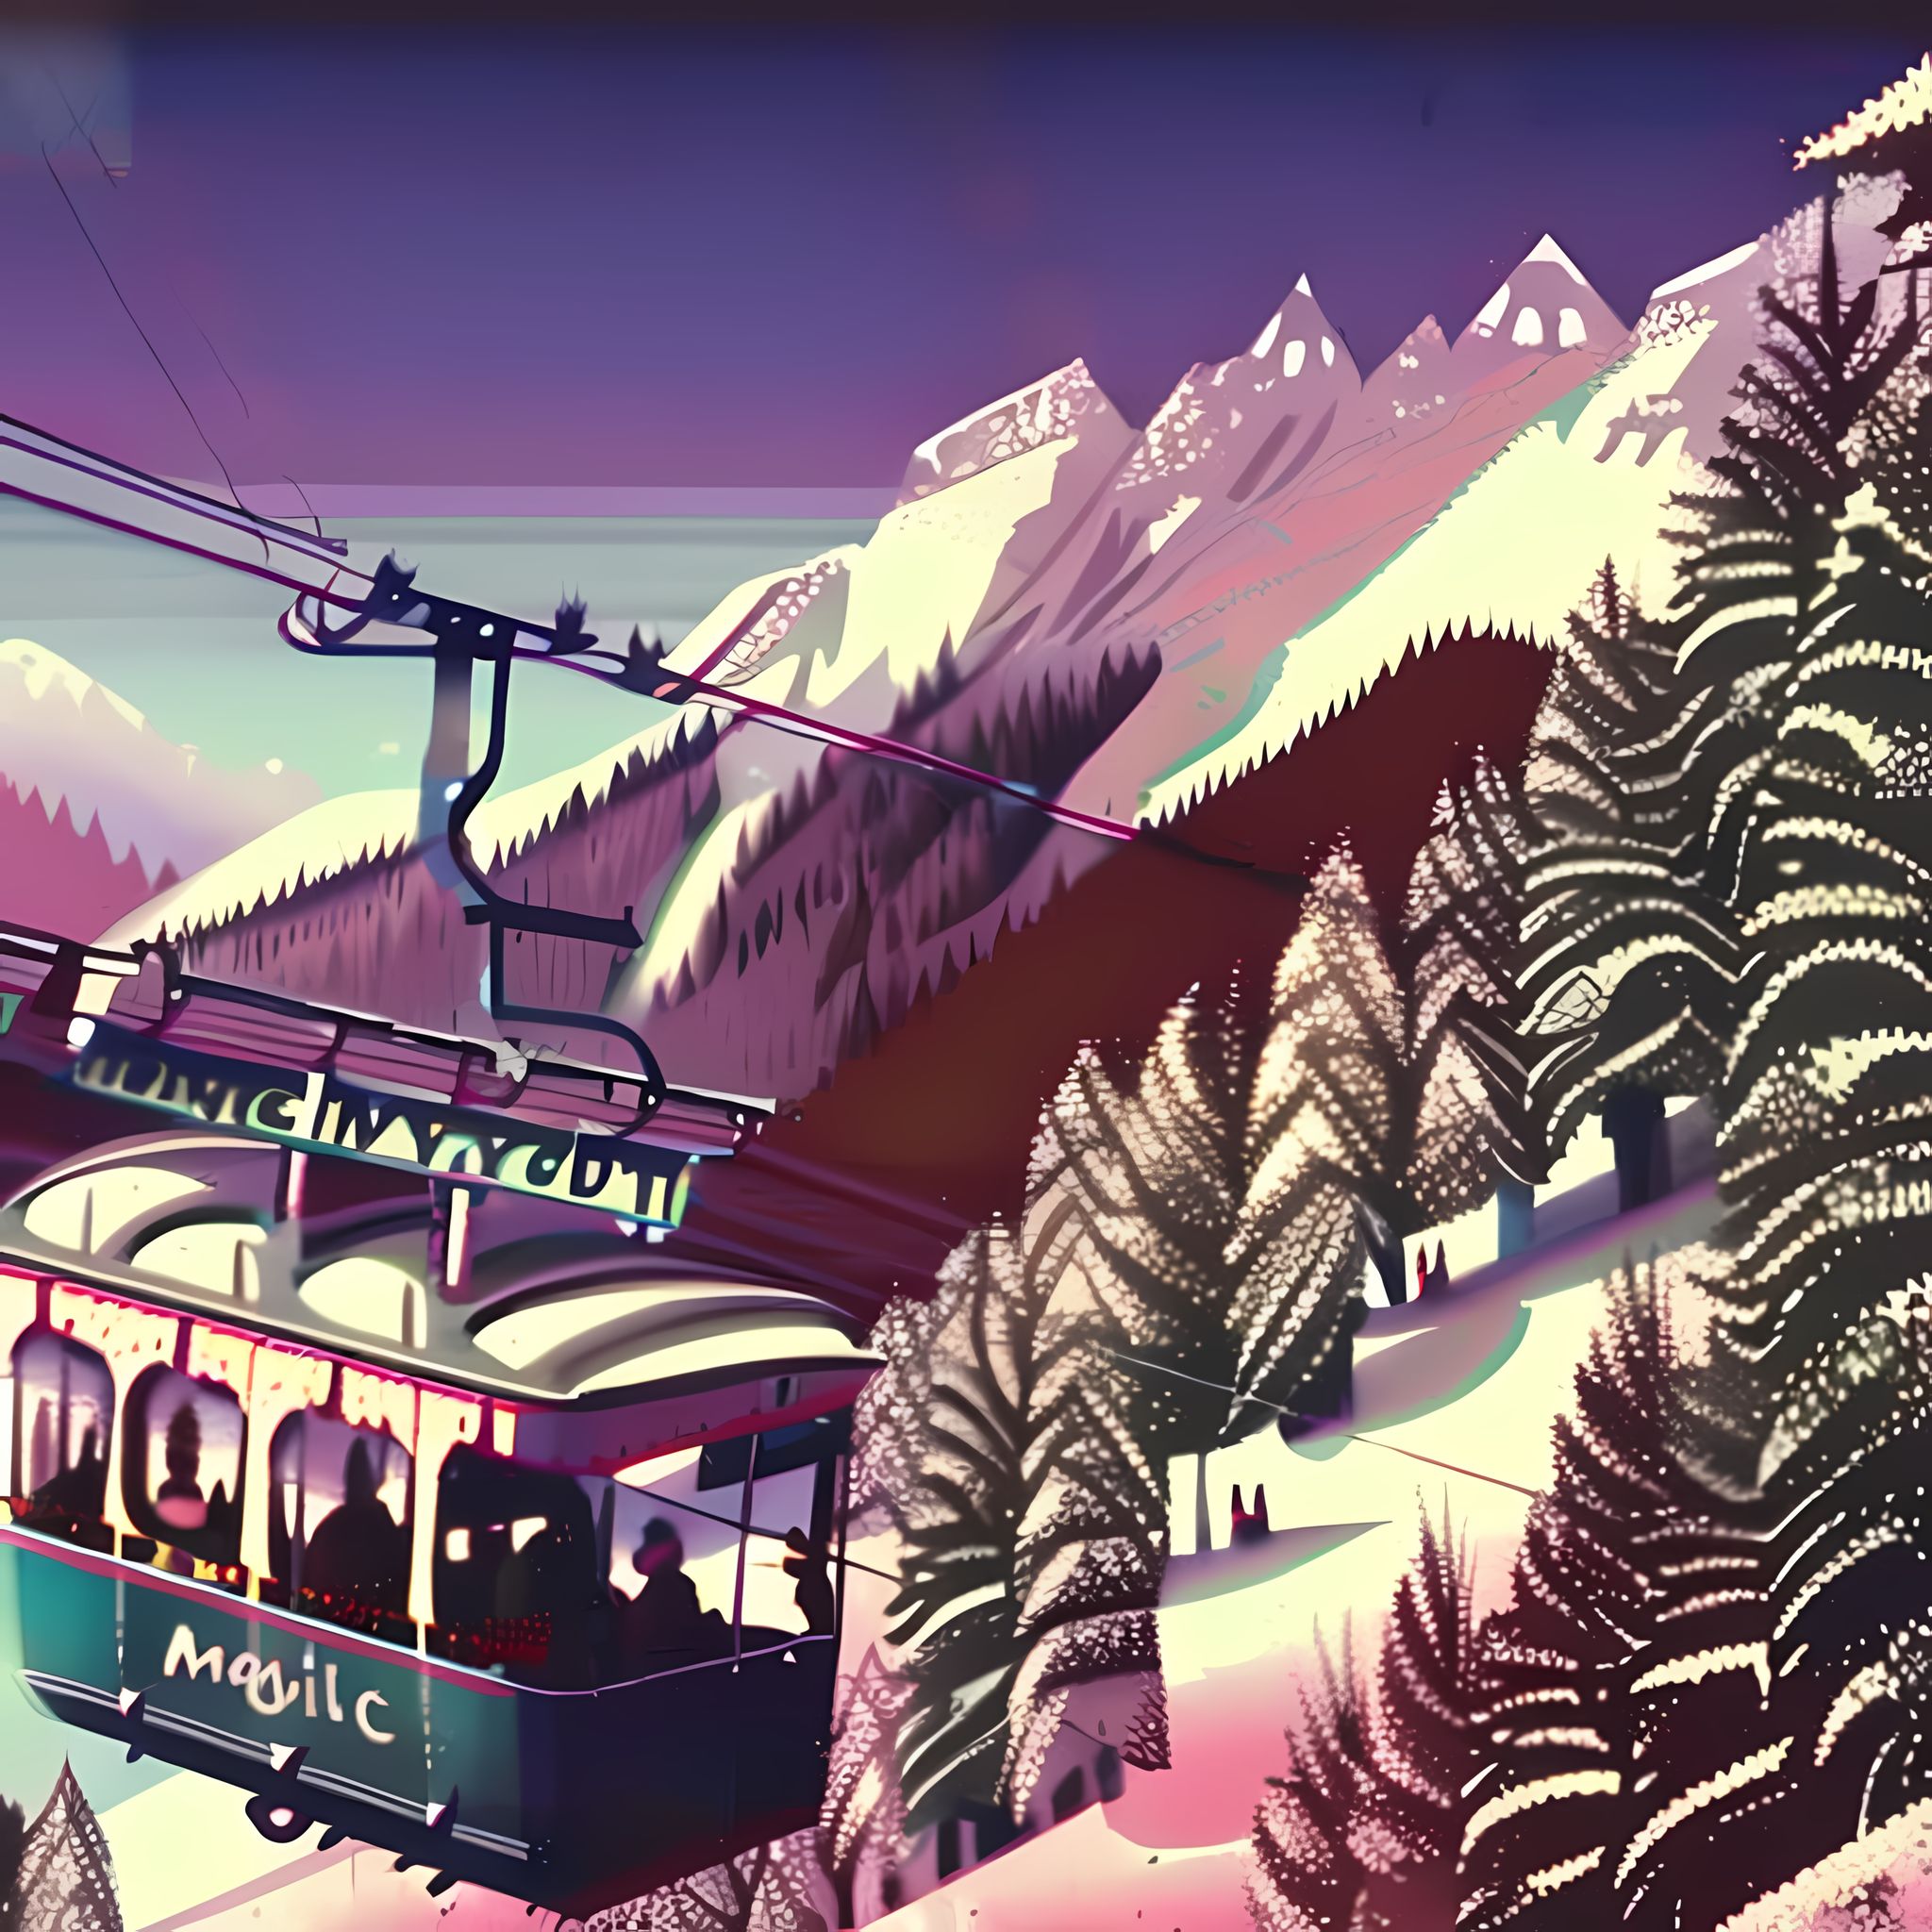 Cable-Car-in-the-swiss-Alps-in-winter-stylized-4k-lots-of-details-vintage-illustration-1970s-p-sr0n